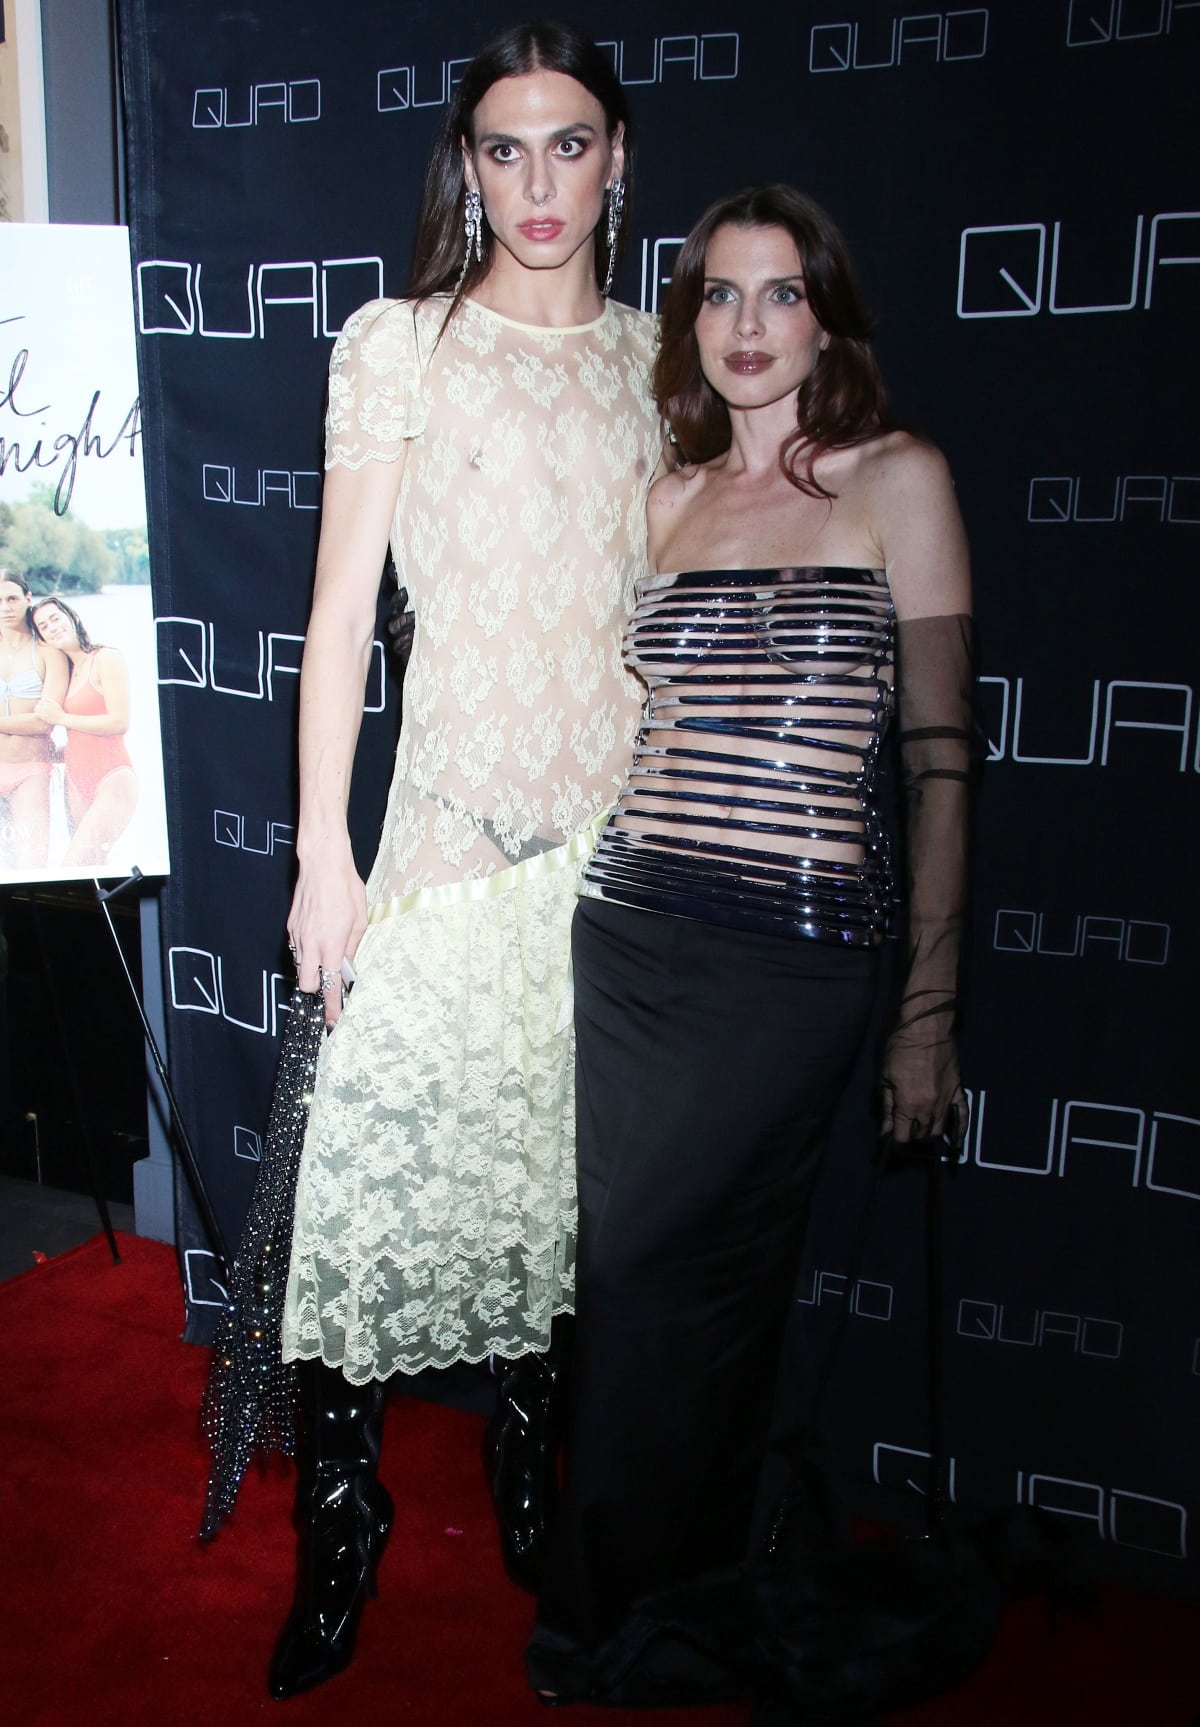 Carmen Madonia towering over Julia Fox as they posed for photographs together on the red carpet